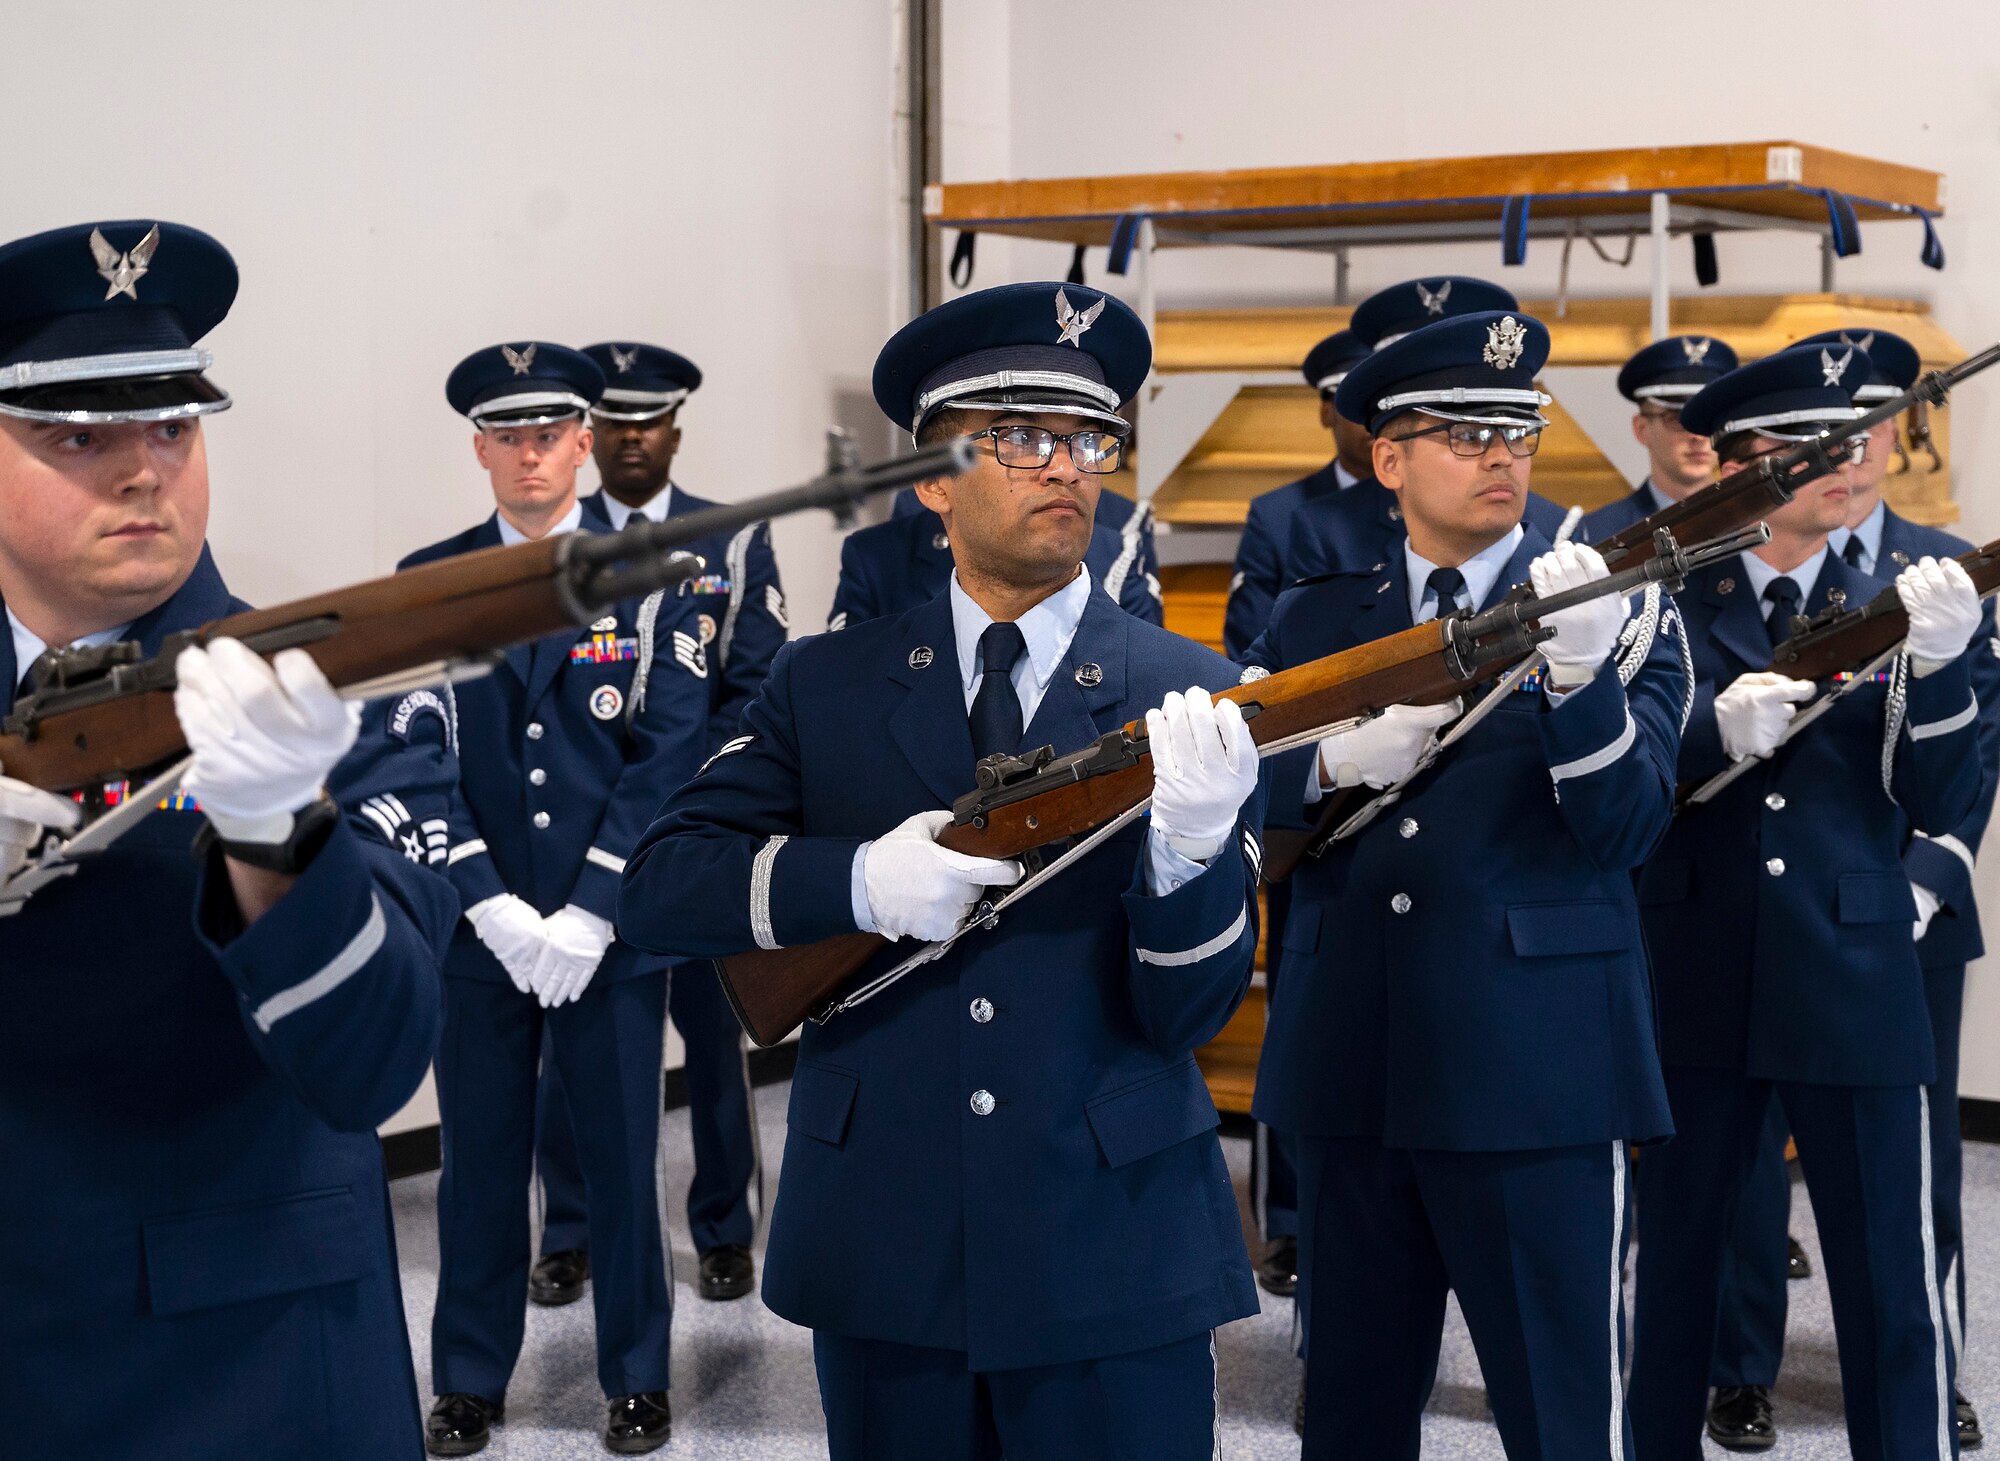 New members of the Wright-Patterson Air Force Base Honor Guard demonstrate the role a firing party plays in a military funeral during their graduation ceremony, April 25, 2022. Guardsmen demonstrated the full funeral service, including a six-man flag fold and taps, prior to receiving their honor guard badges. (U.S. Air Force photo by R.J. Oriez)